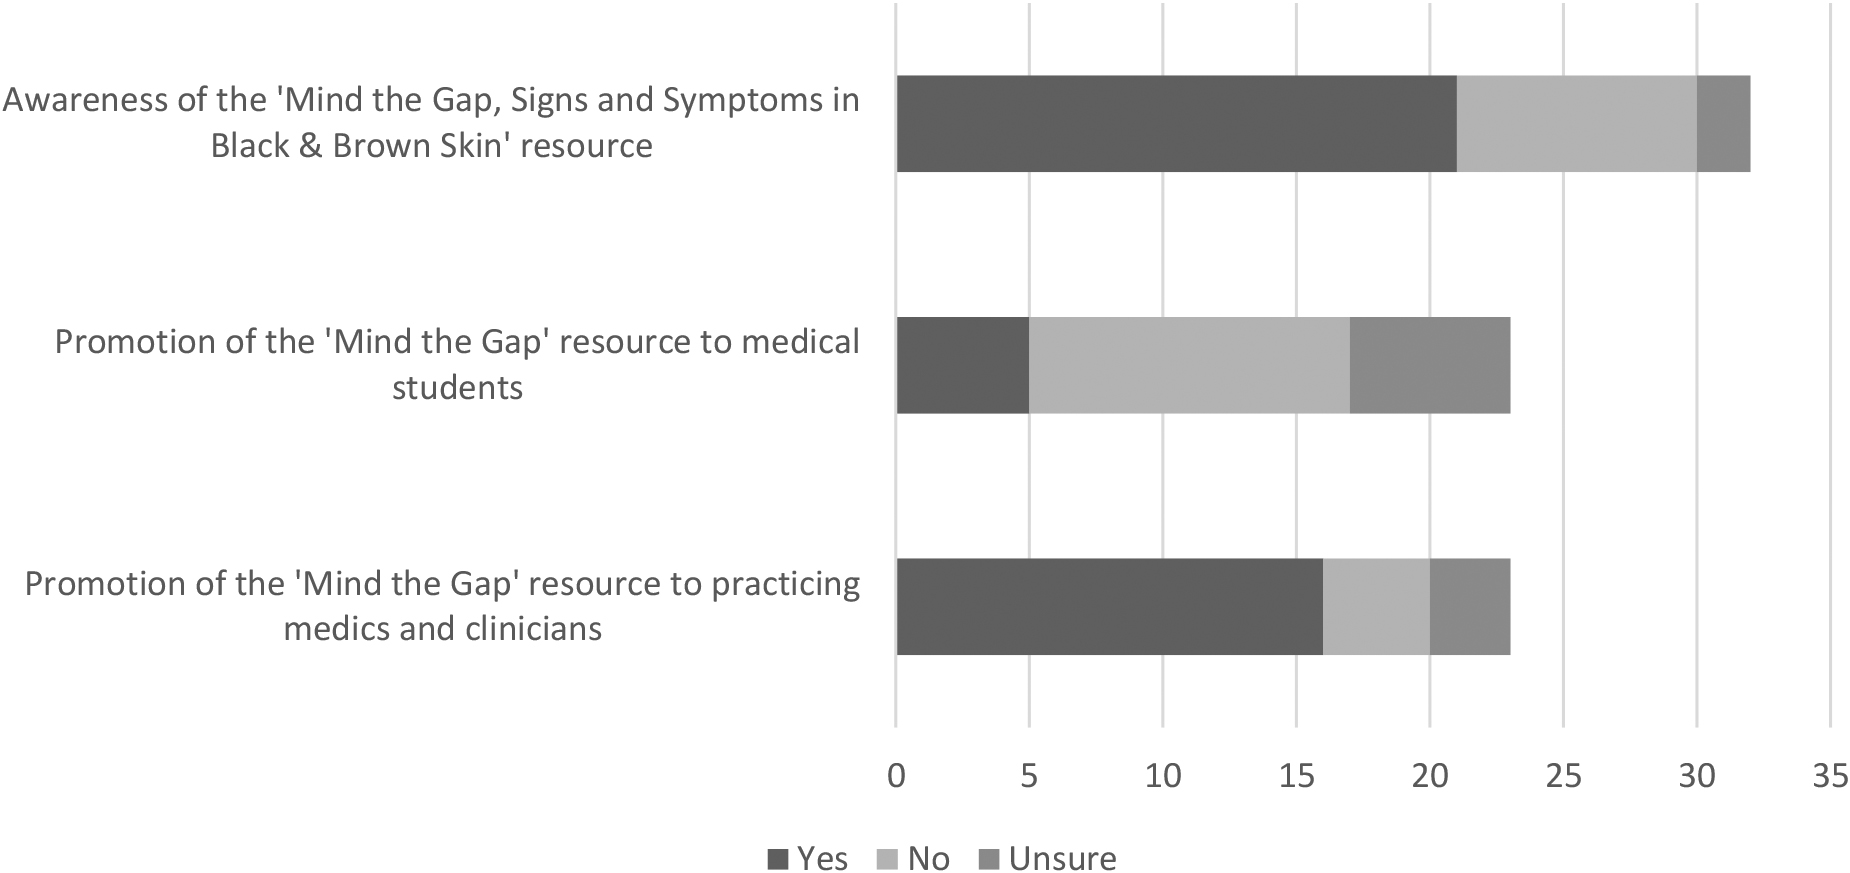 Awareness of the resource ‘Mind the Gap: signs and symptoms in Black and Brown skin’ [n= 32].